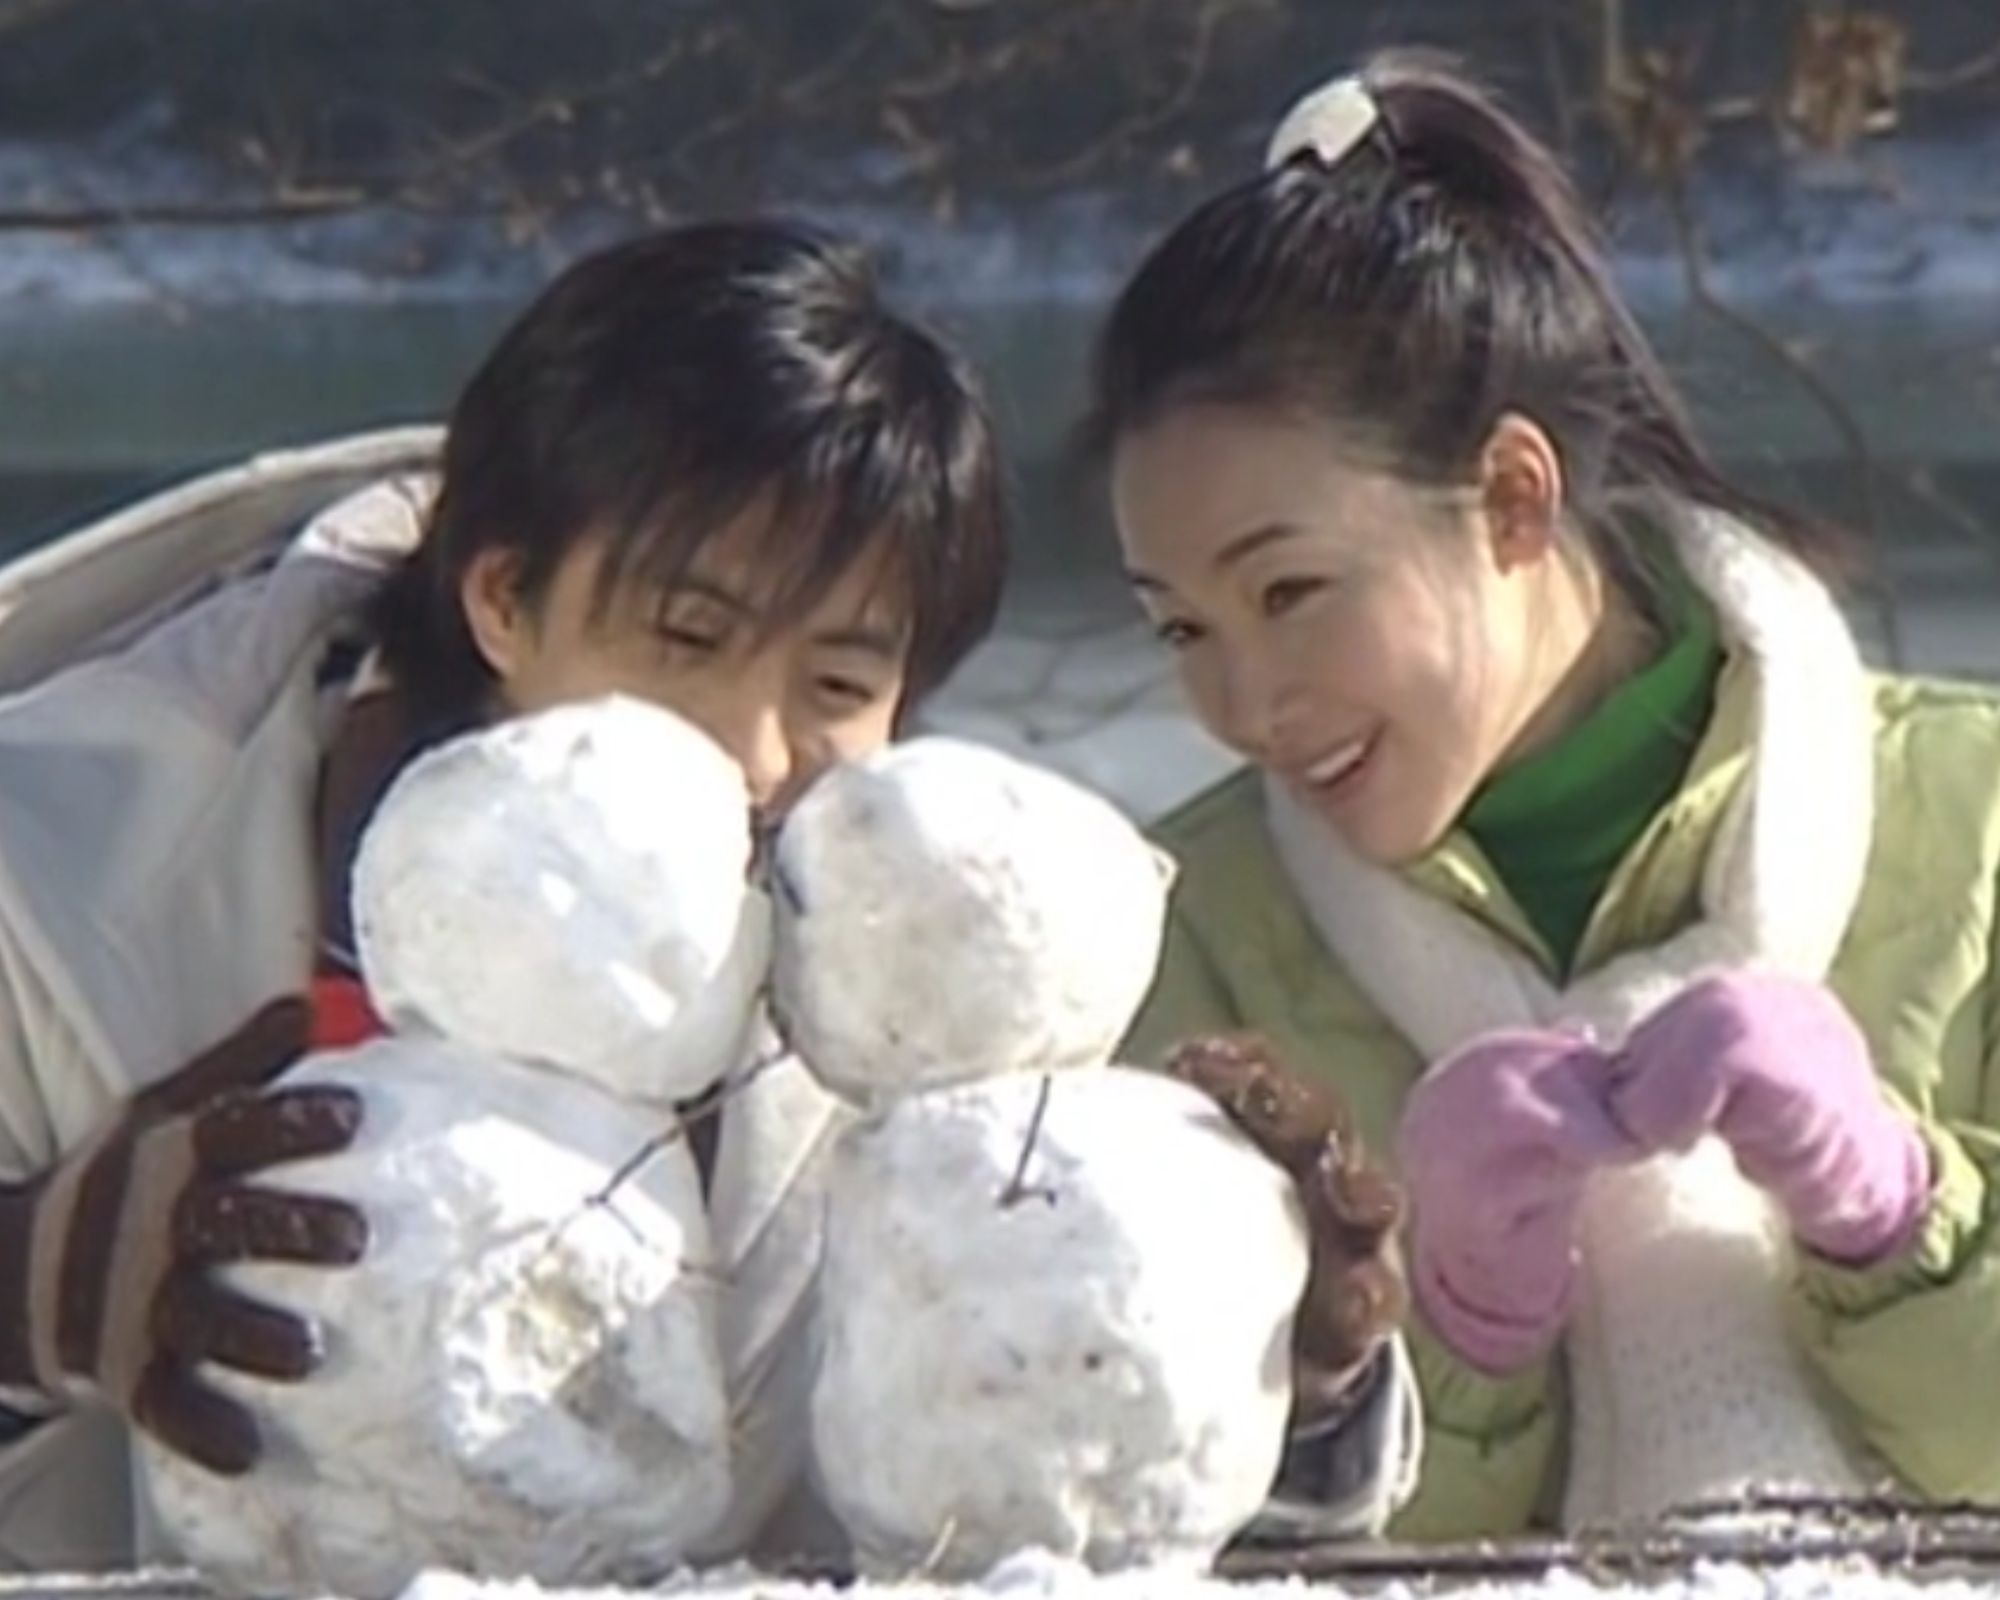 Winter Sonata - Unspoiled Review<br />
